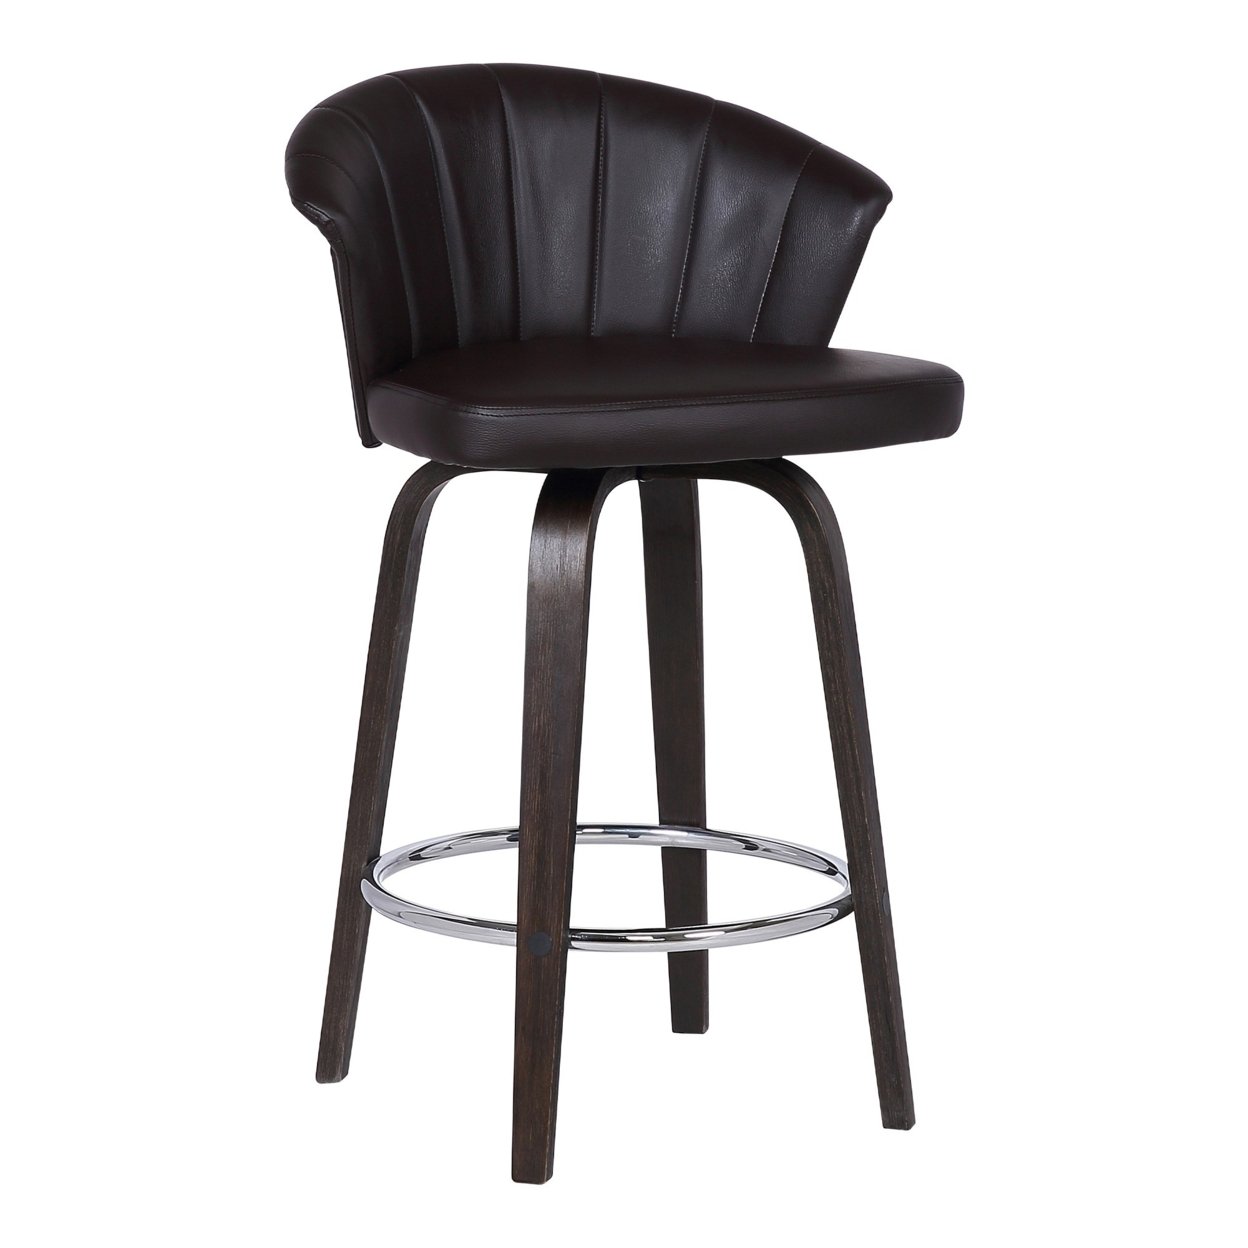 26 Channel Stitched Faux Leather Barstool With Tapered Legs, Brown- Saltoro Sherpi